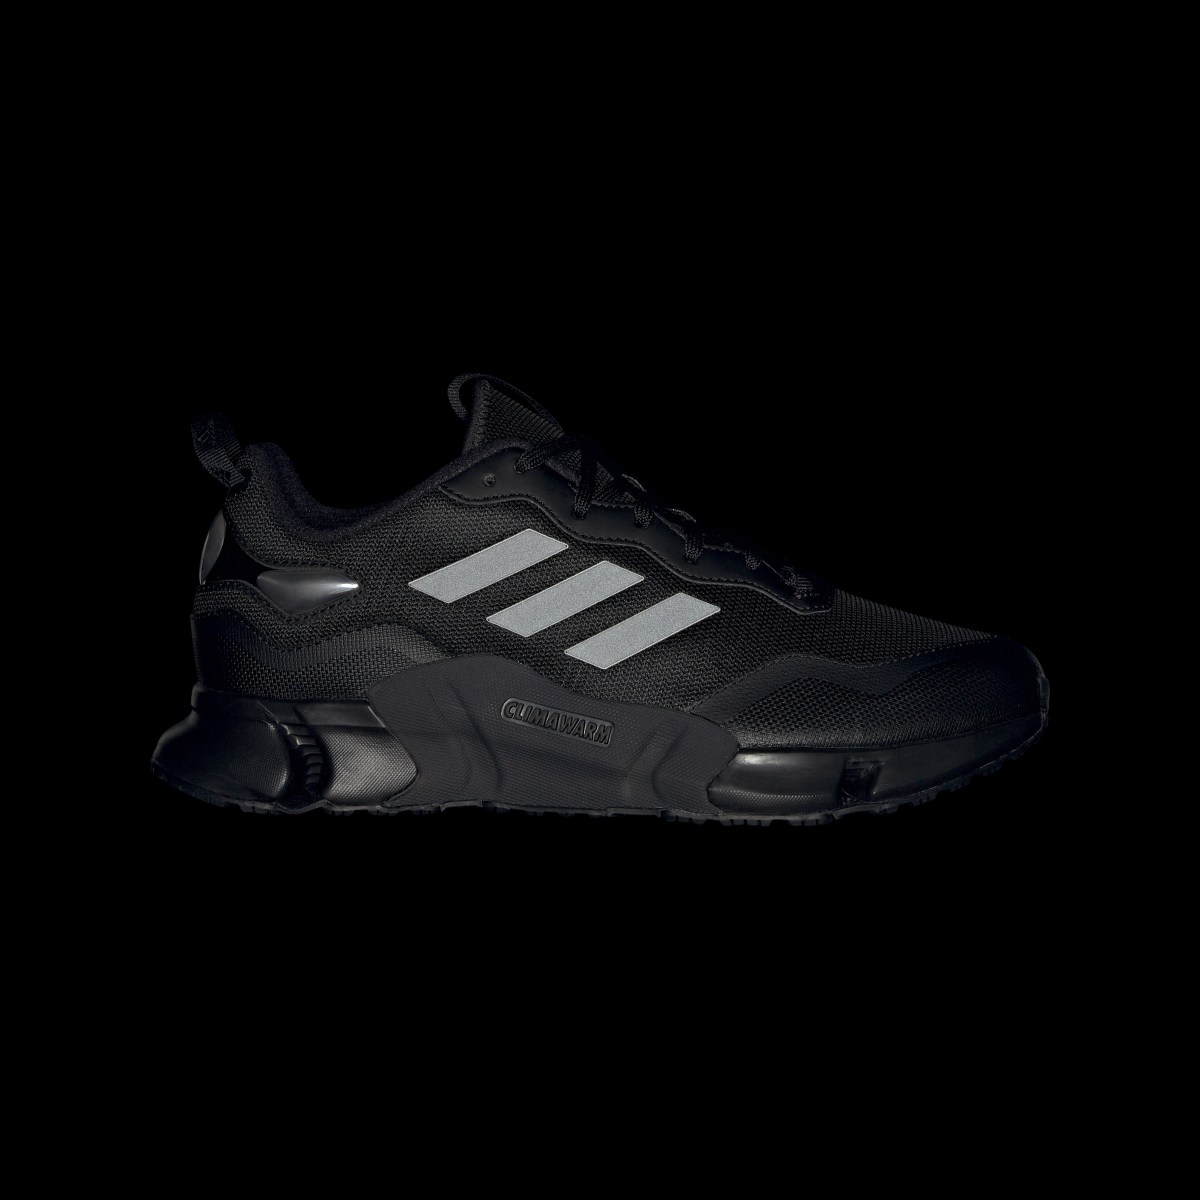 Adidas Climawarm Shoes. 5